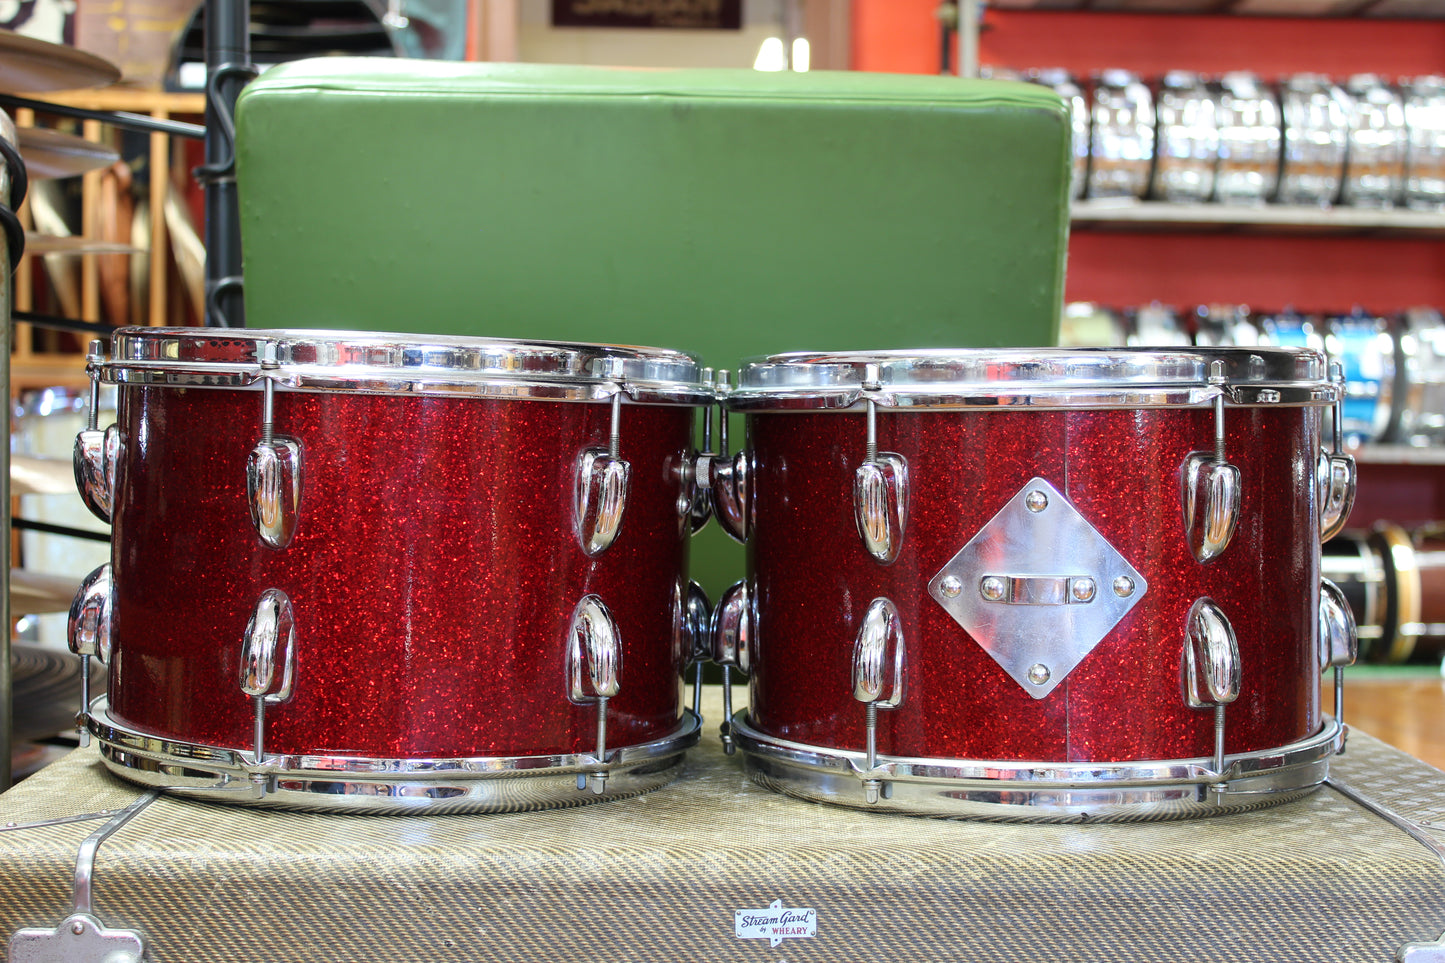 1966 Slingerland Modern Solo outfit in Sparkling Red Pearl 14x20 16x16 8x12 8x12